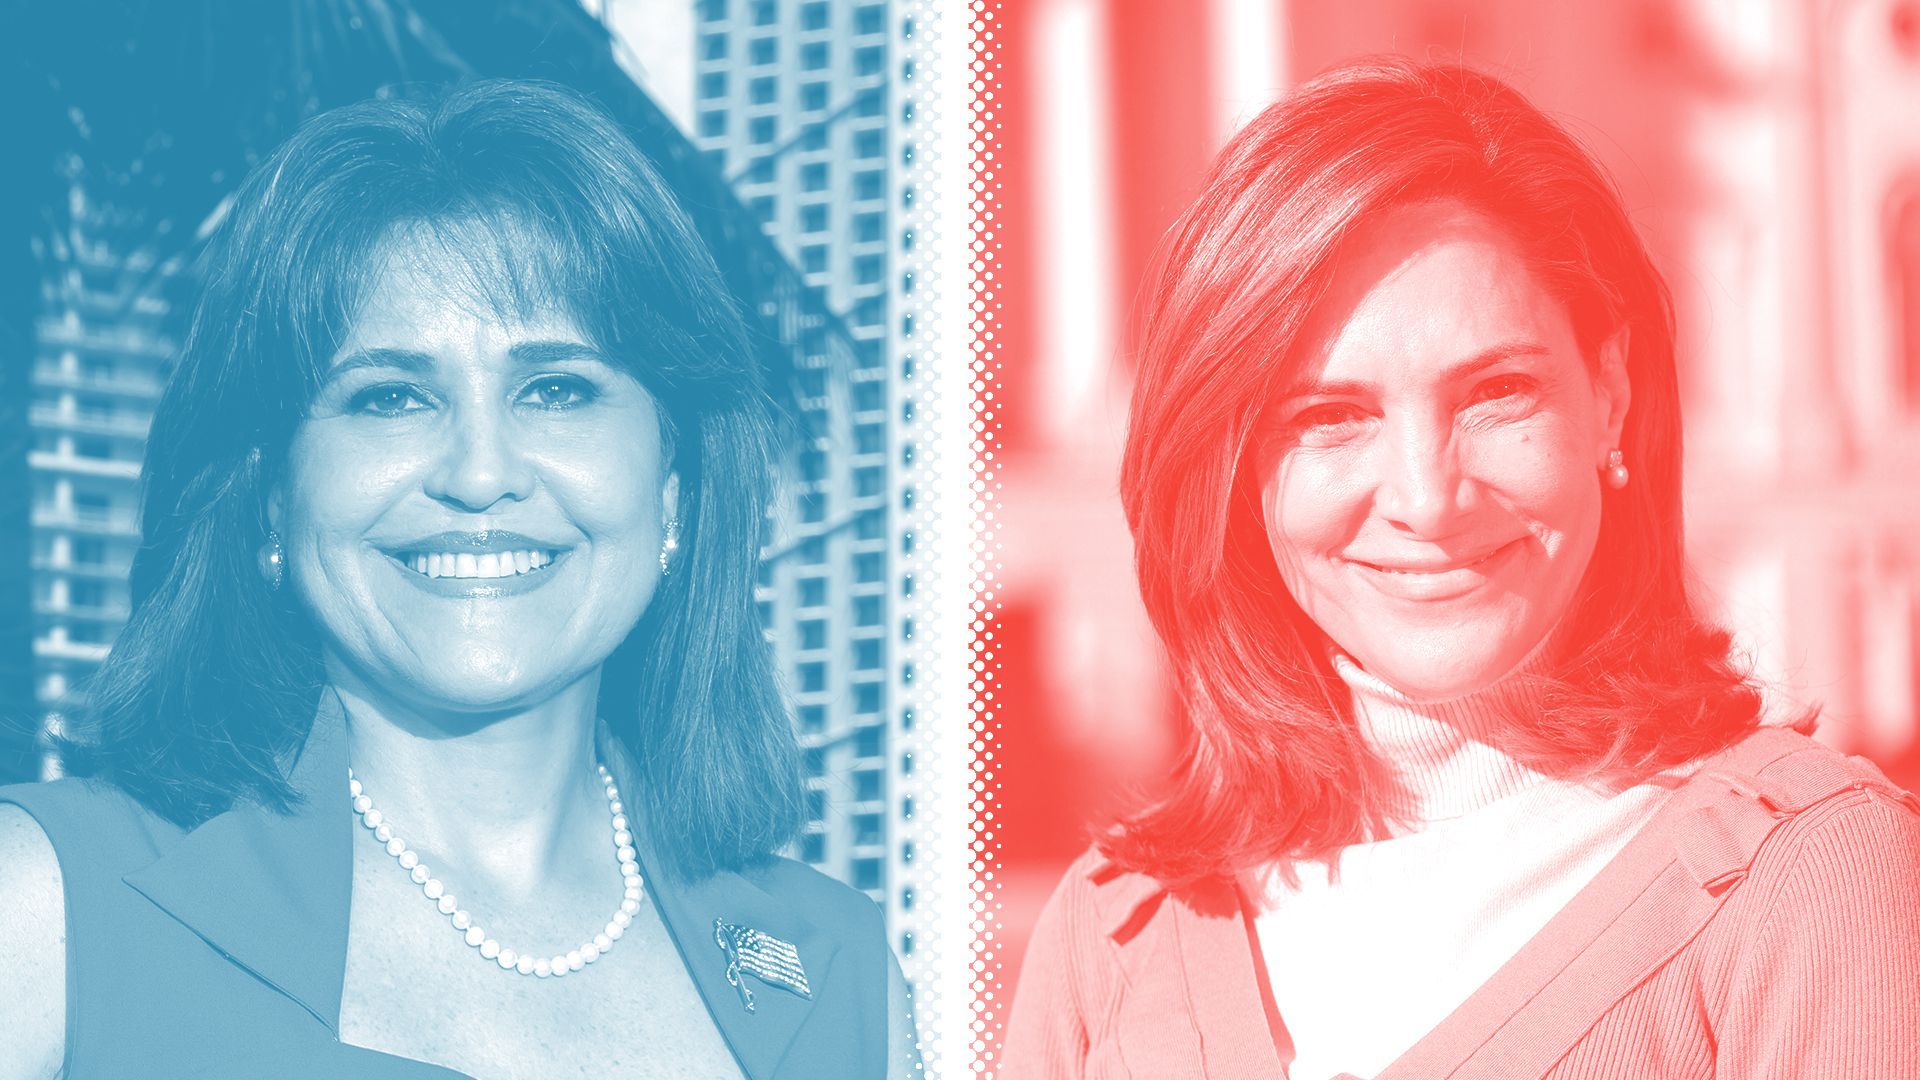 Photo illustration of Annette Taddeo, tinted blue, and Maria Elvira Salazar, tinted red, separated by a white halftone divider.